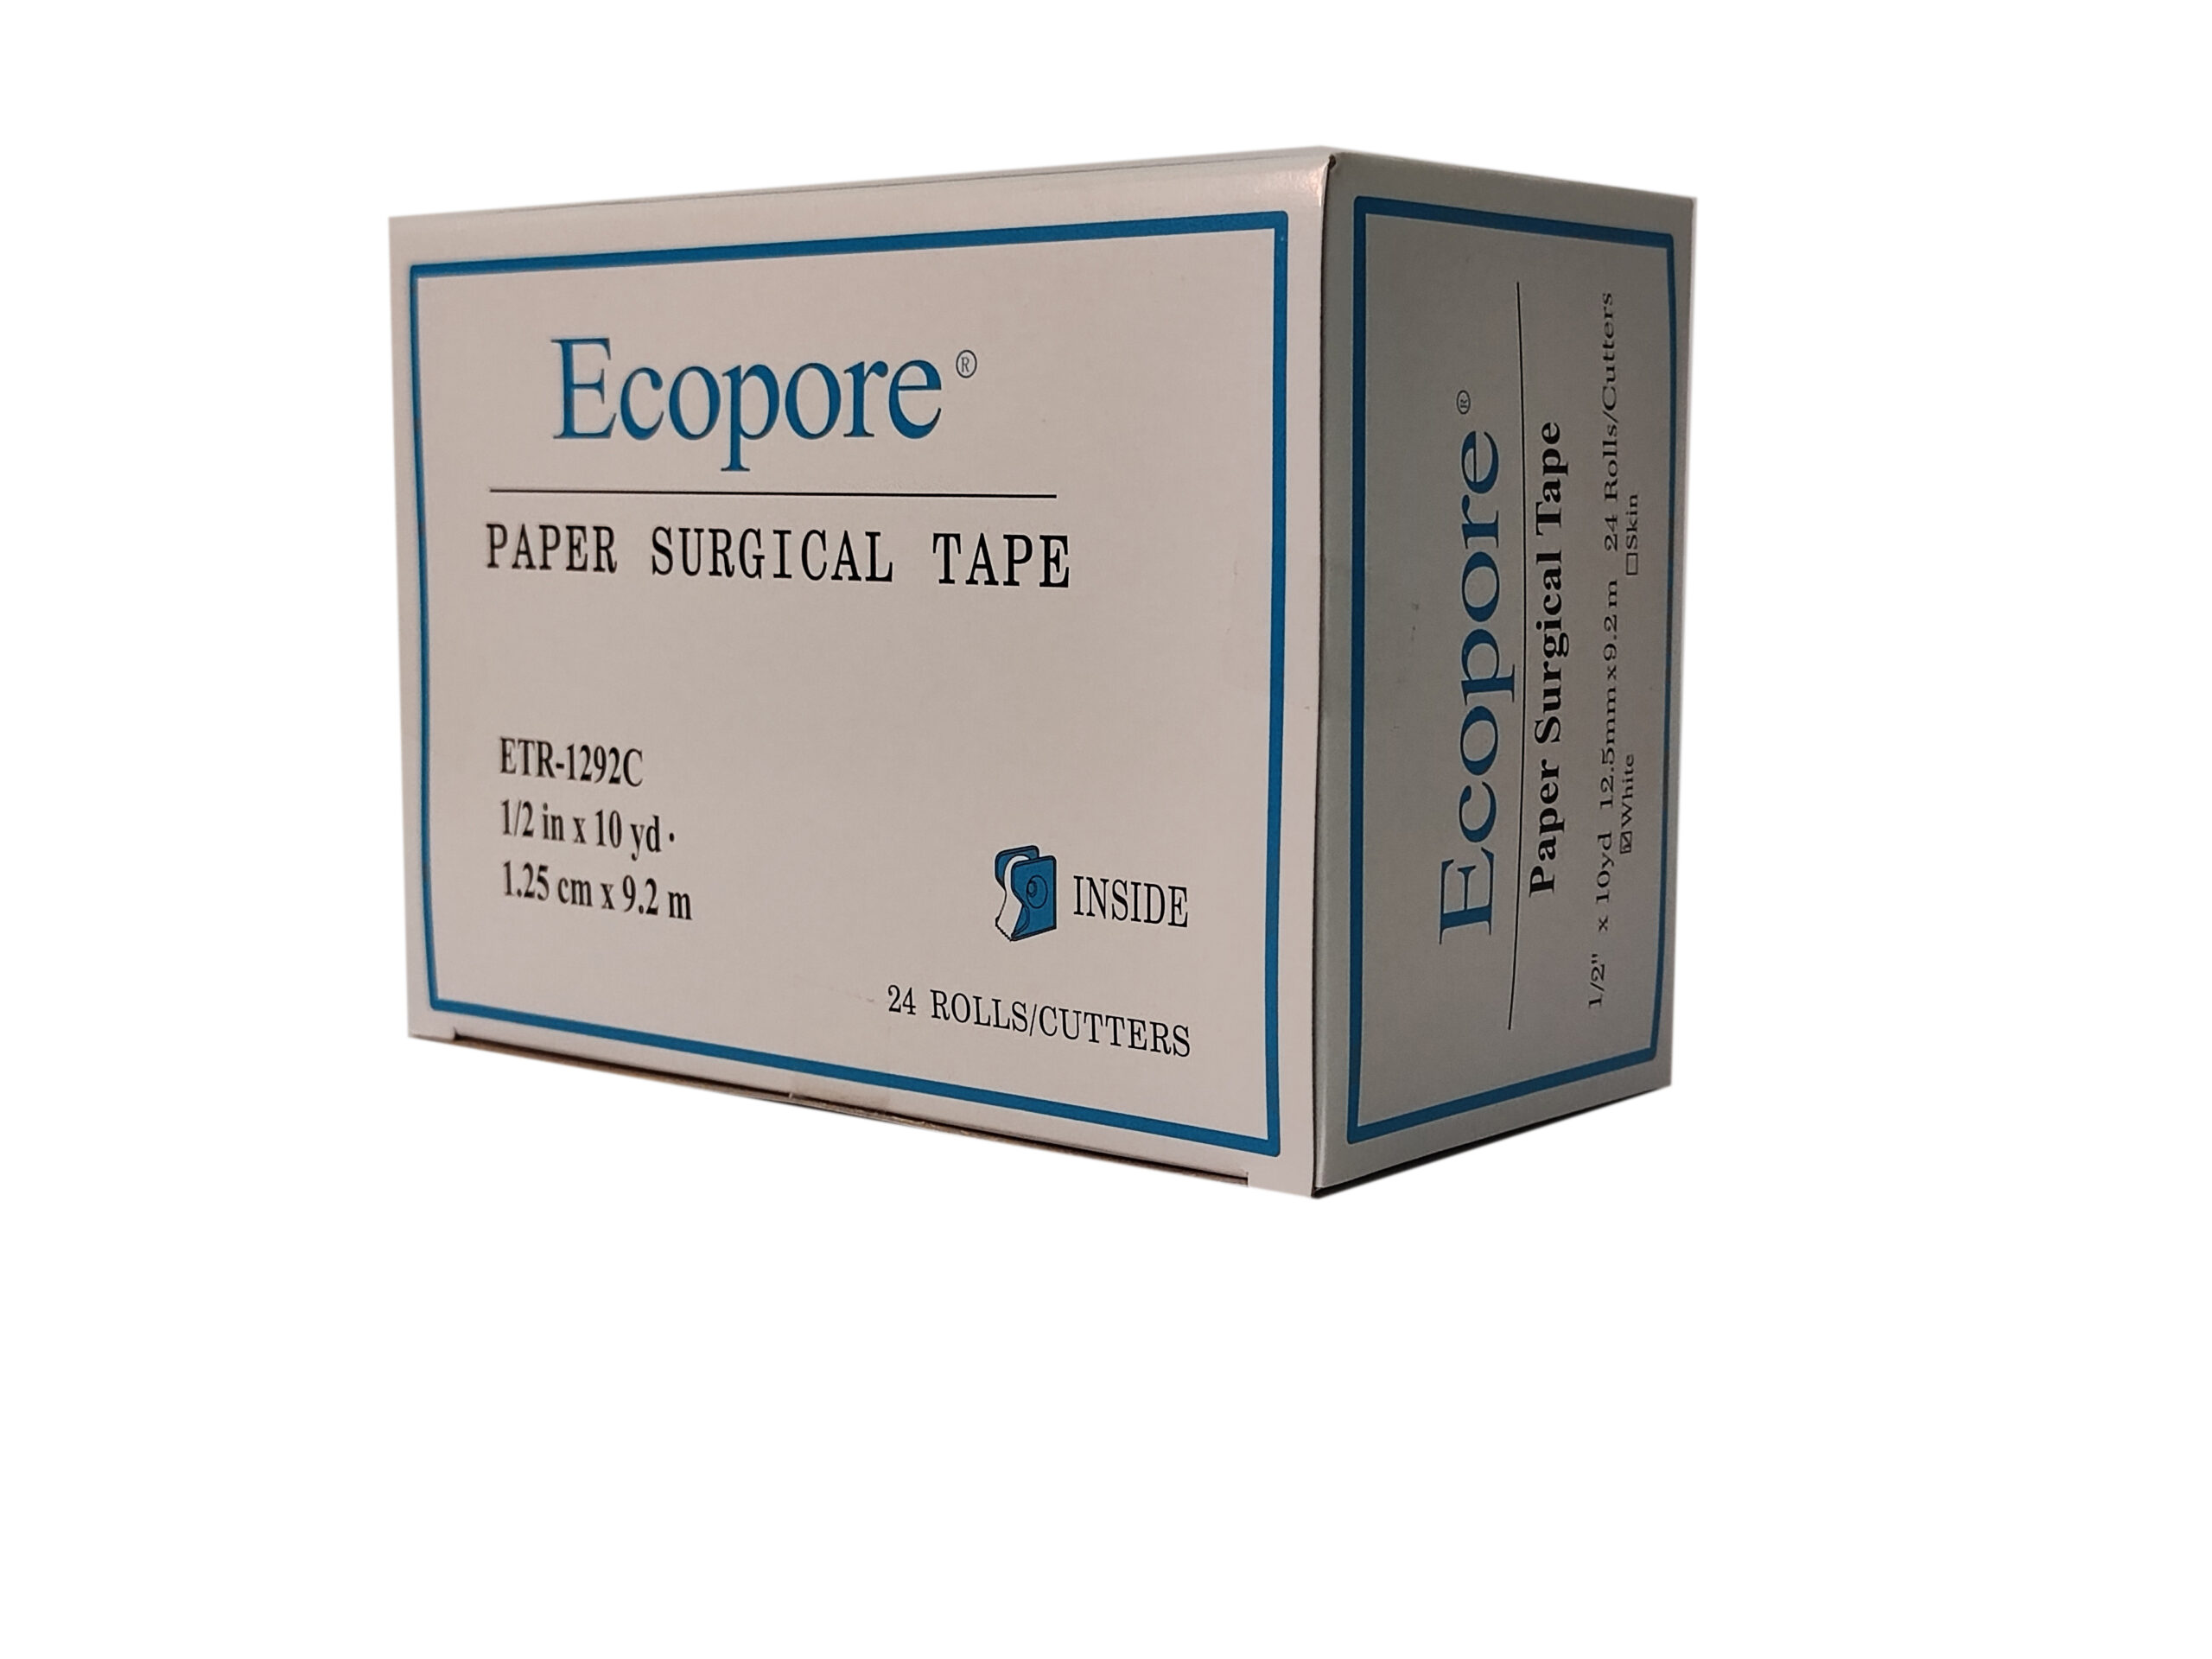 Ecopore Surgical Tape with Cutter